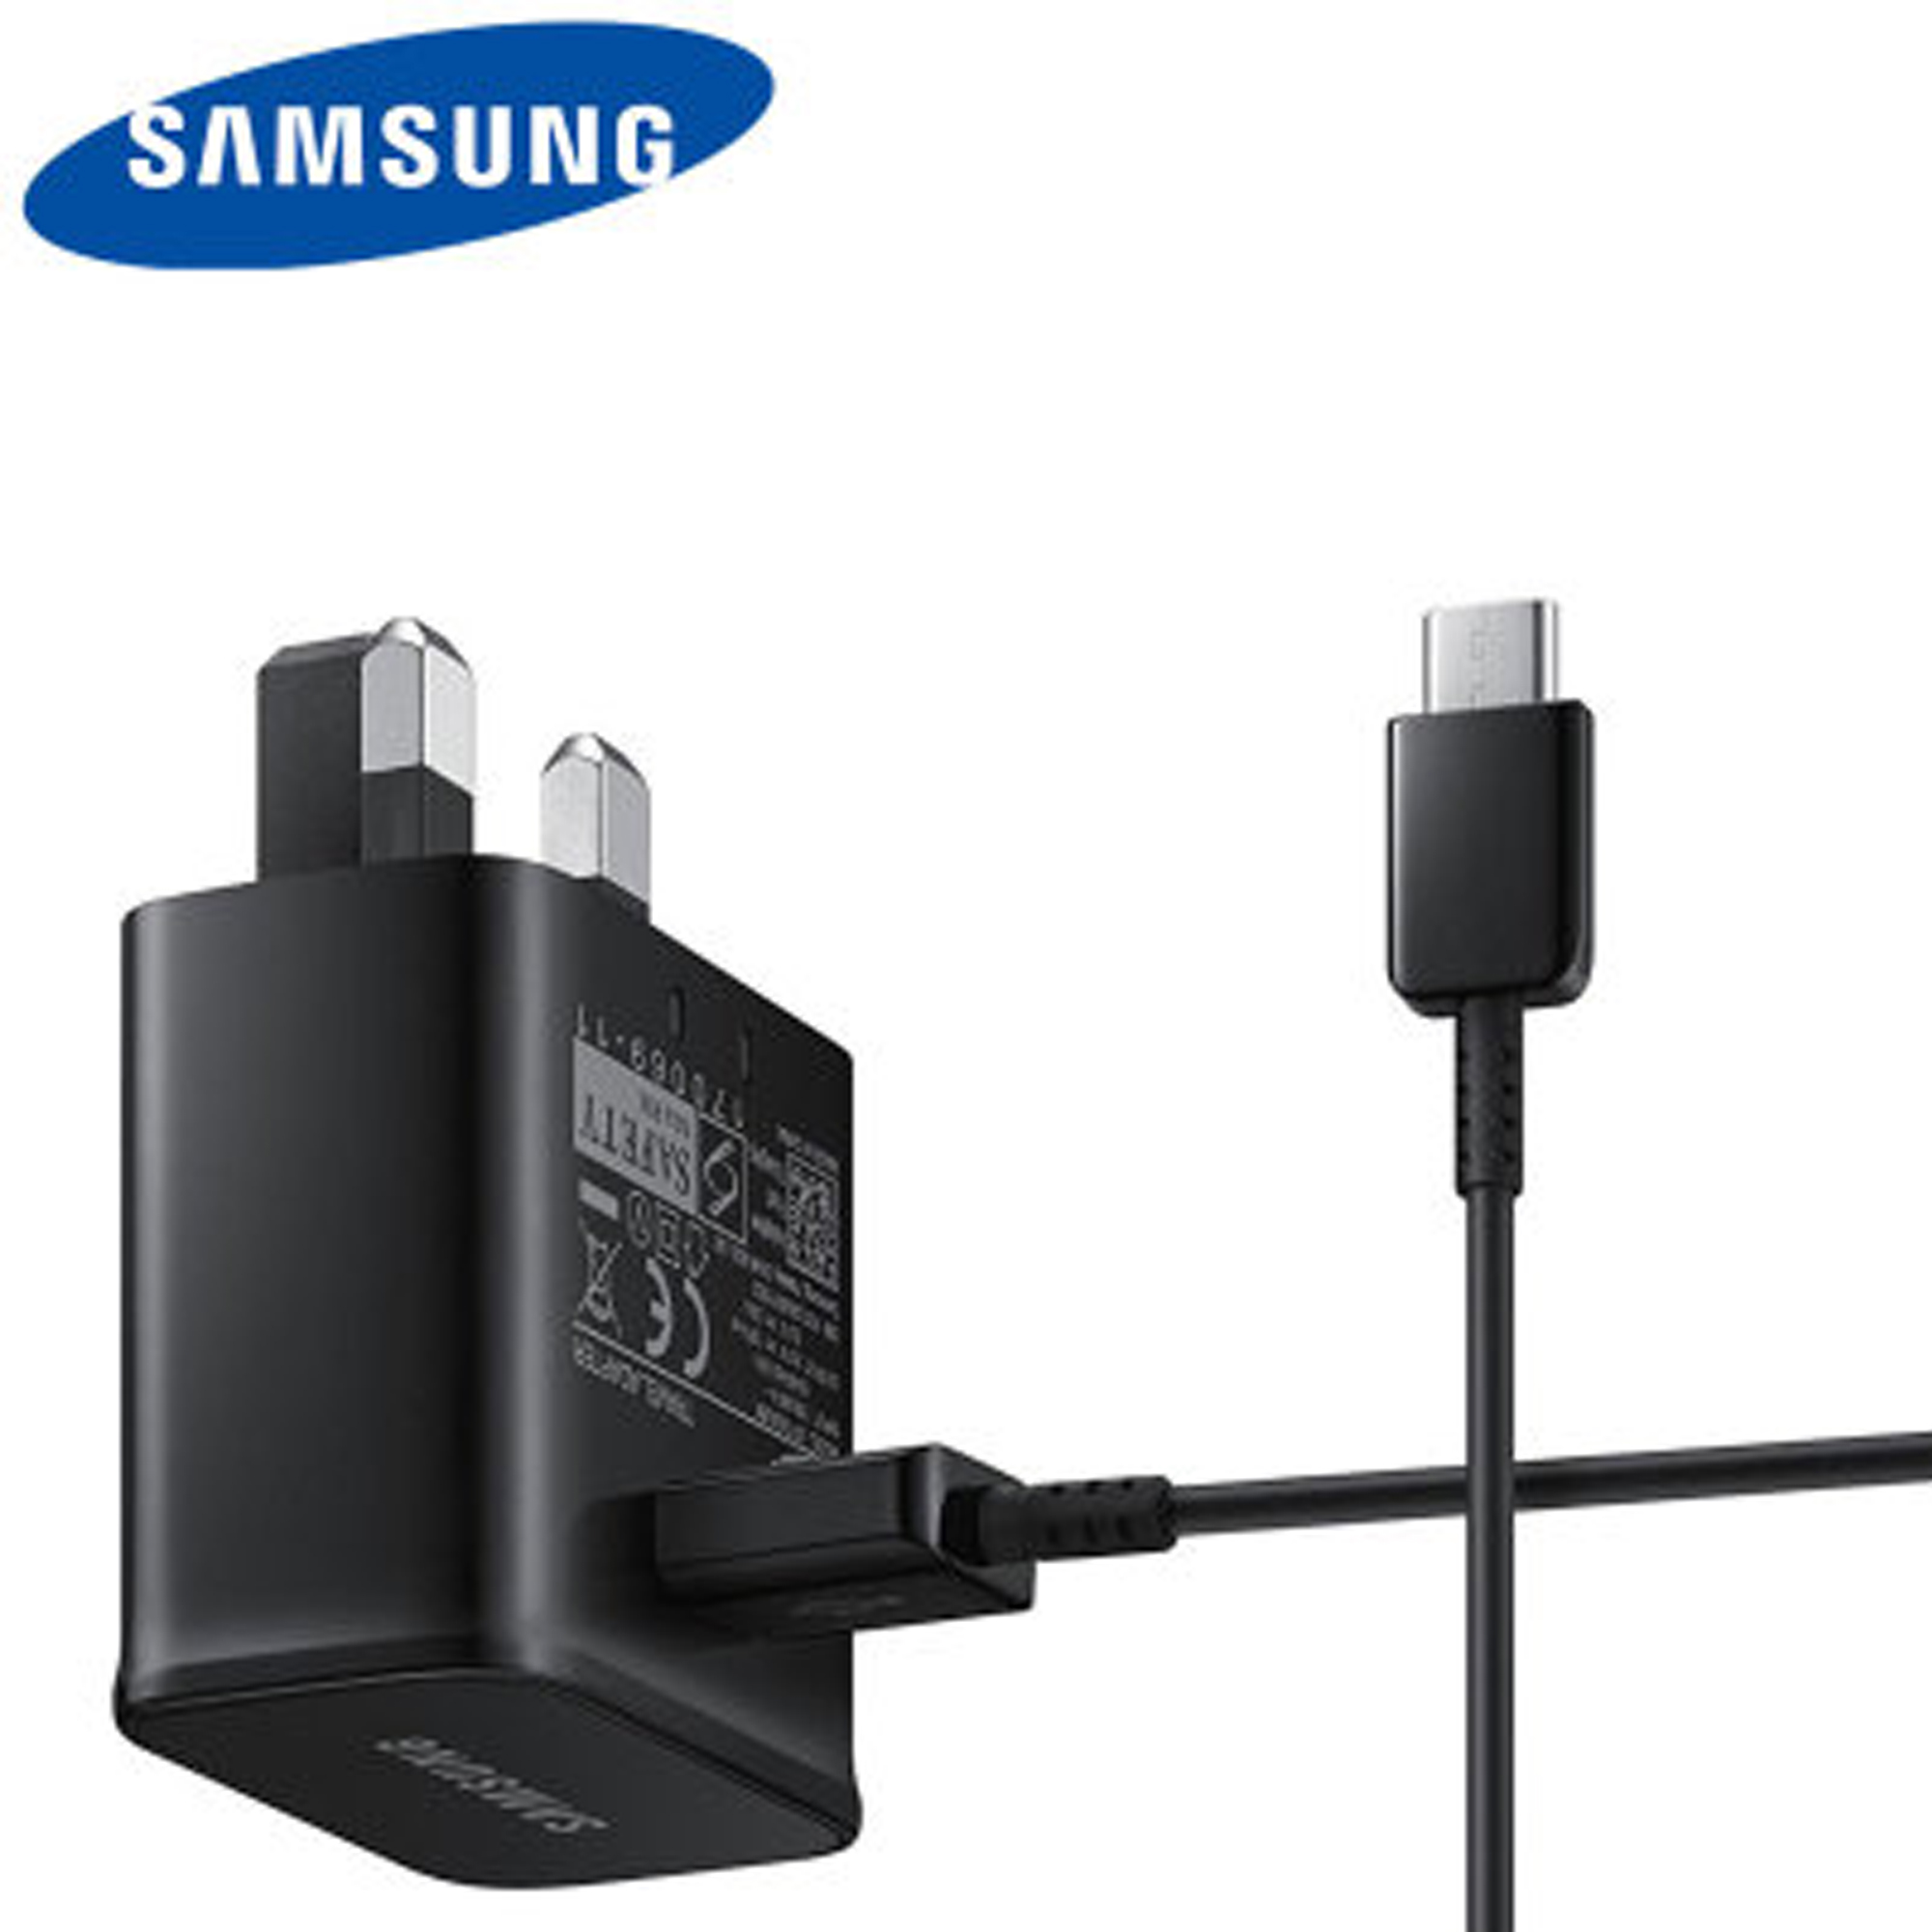 Compatible with Galaxy S9 S9 Plus S8 USB C Male to USB C Female Adapter Extension EASTWILD Type C Extender for Samsung DeX Note 8 S8 Plus MacBook air and MacBook pro and All USB C Devices 